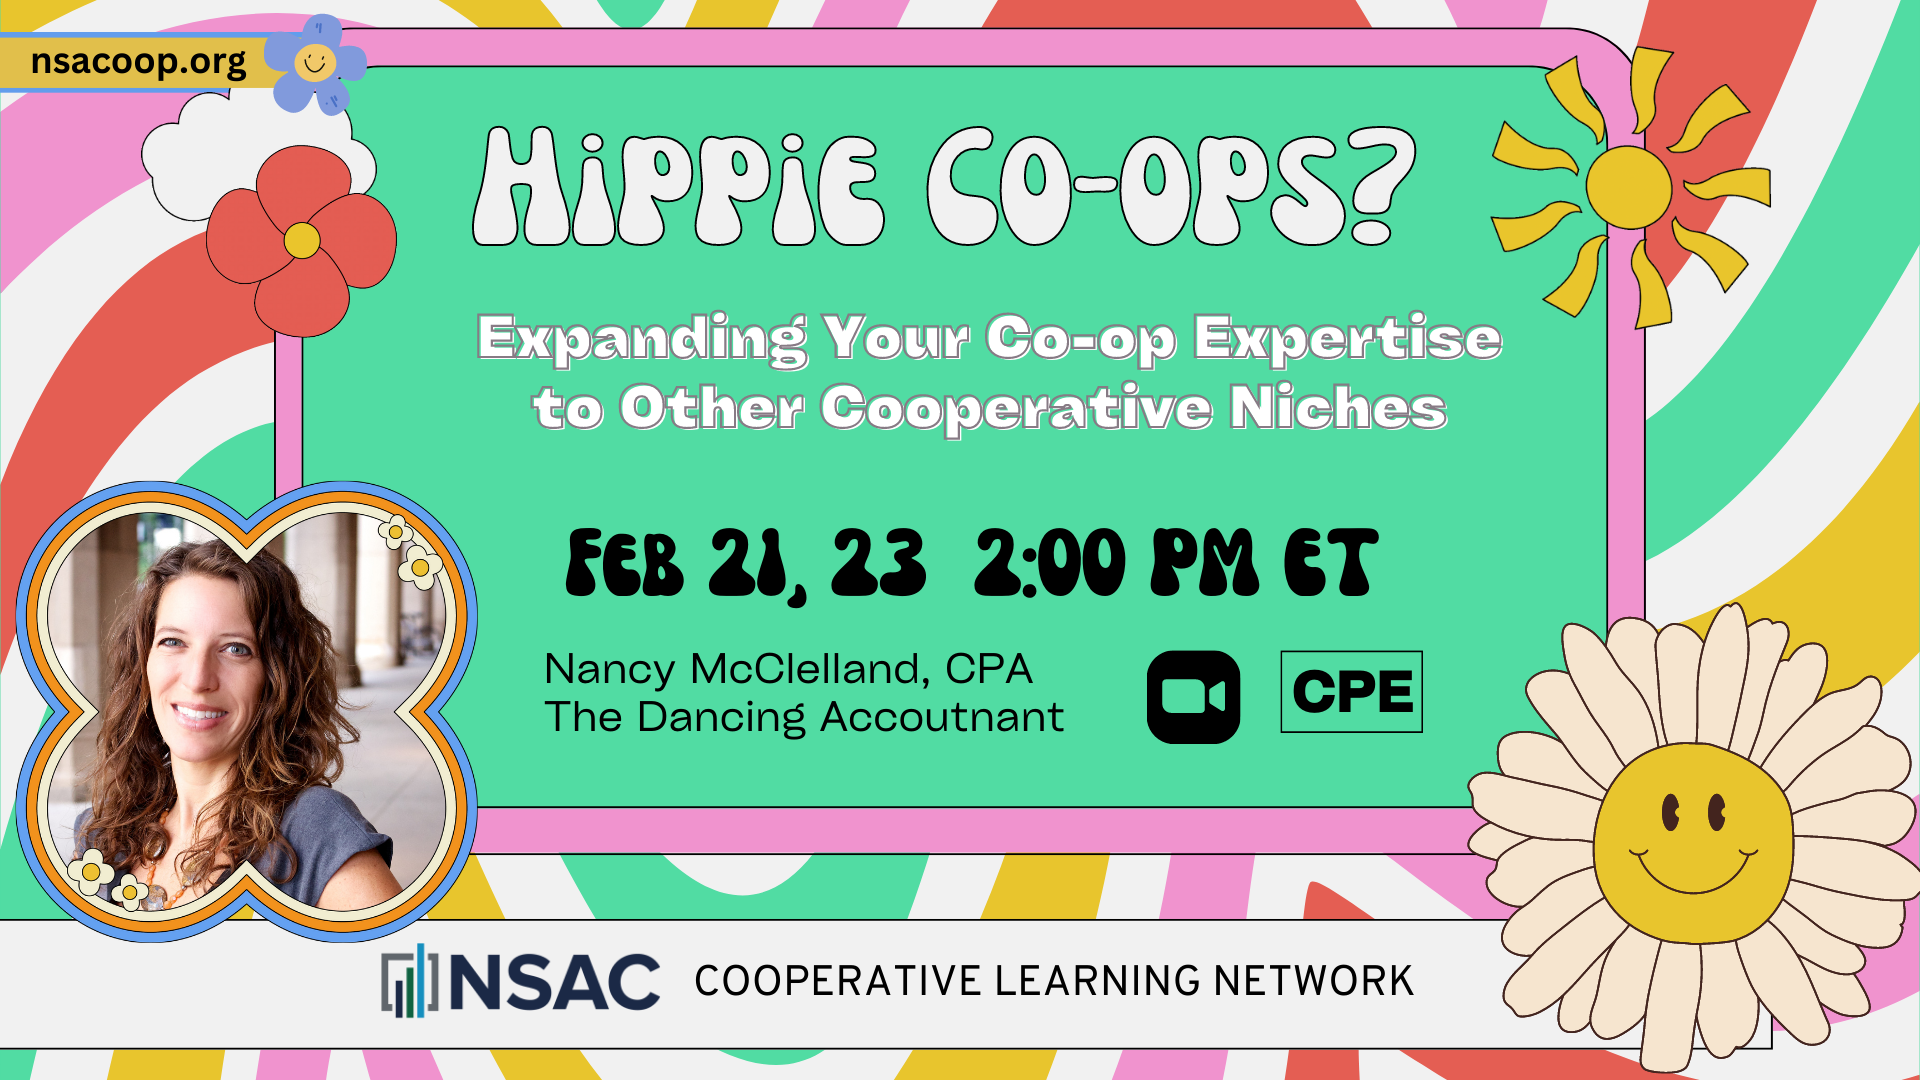 Hippie Co-ops? Expanding Your Co-op Expertise to Other Cooperative Niches